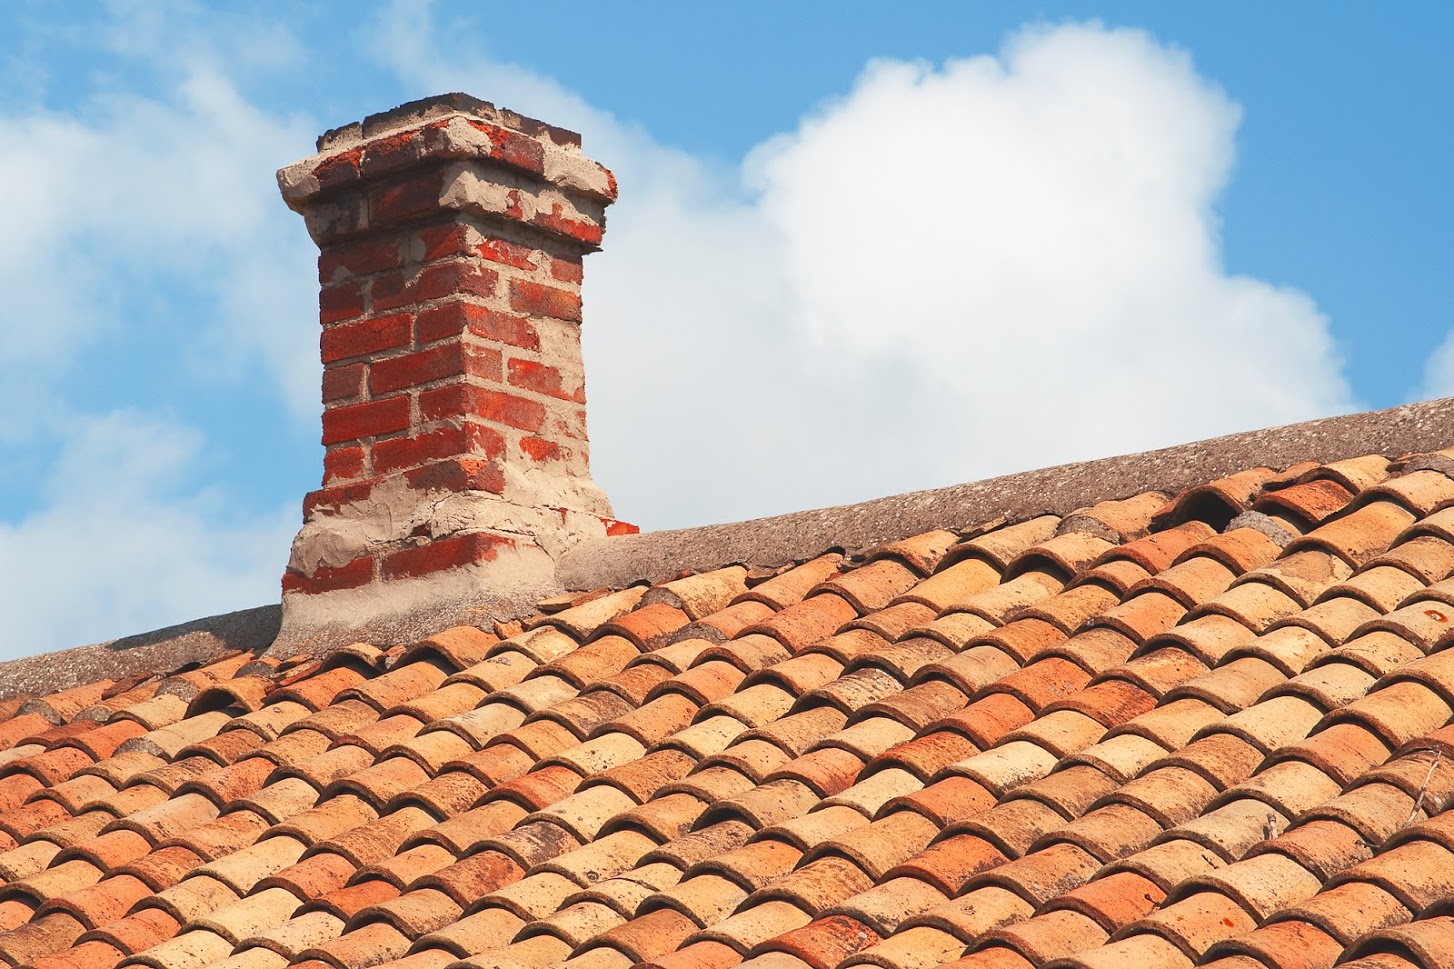 concrete tile roof with maintenance issues